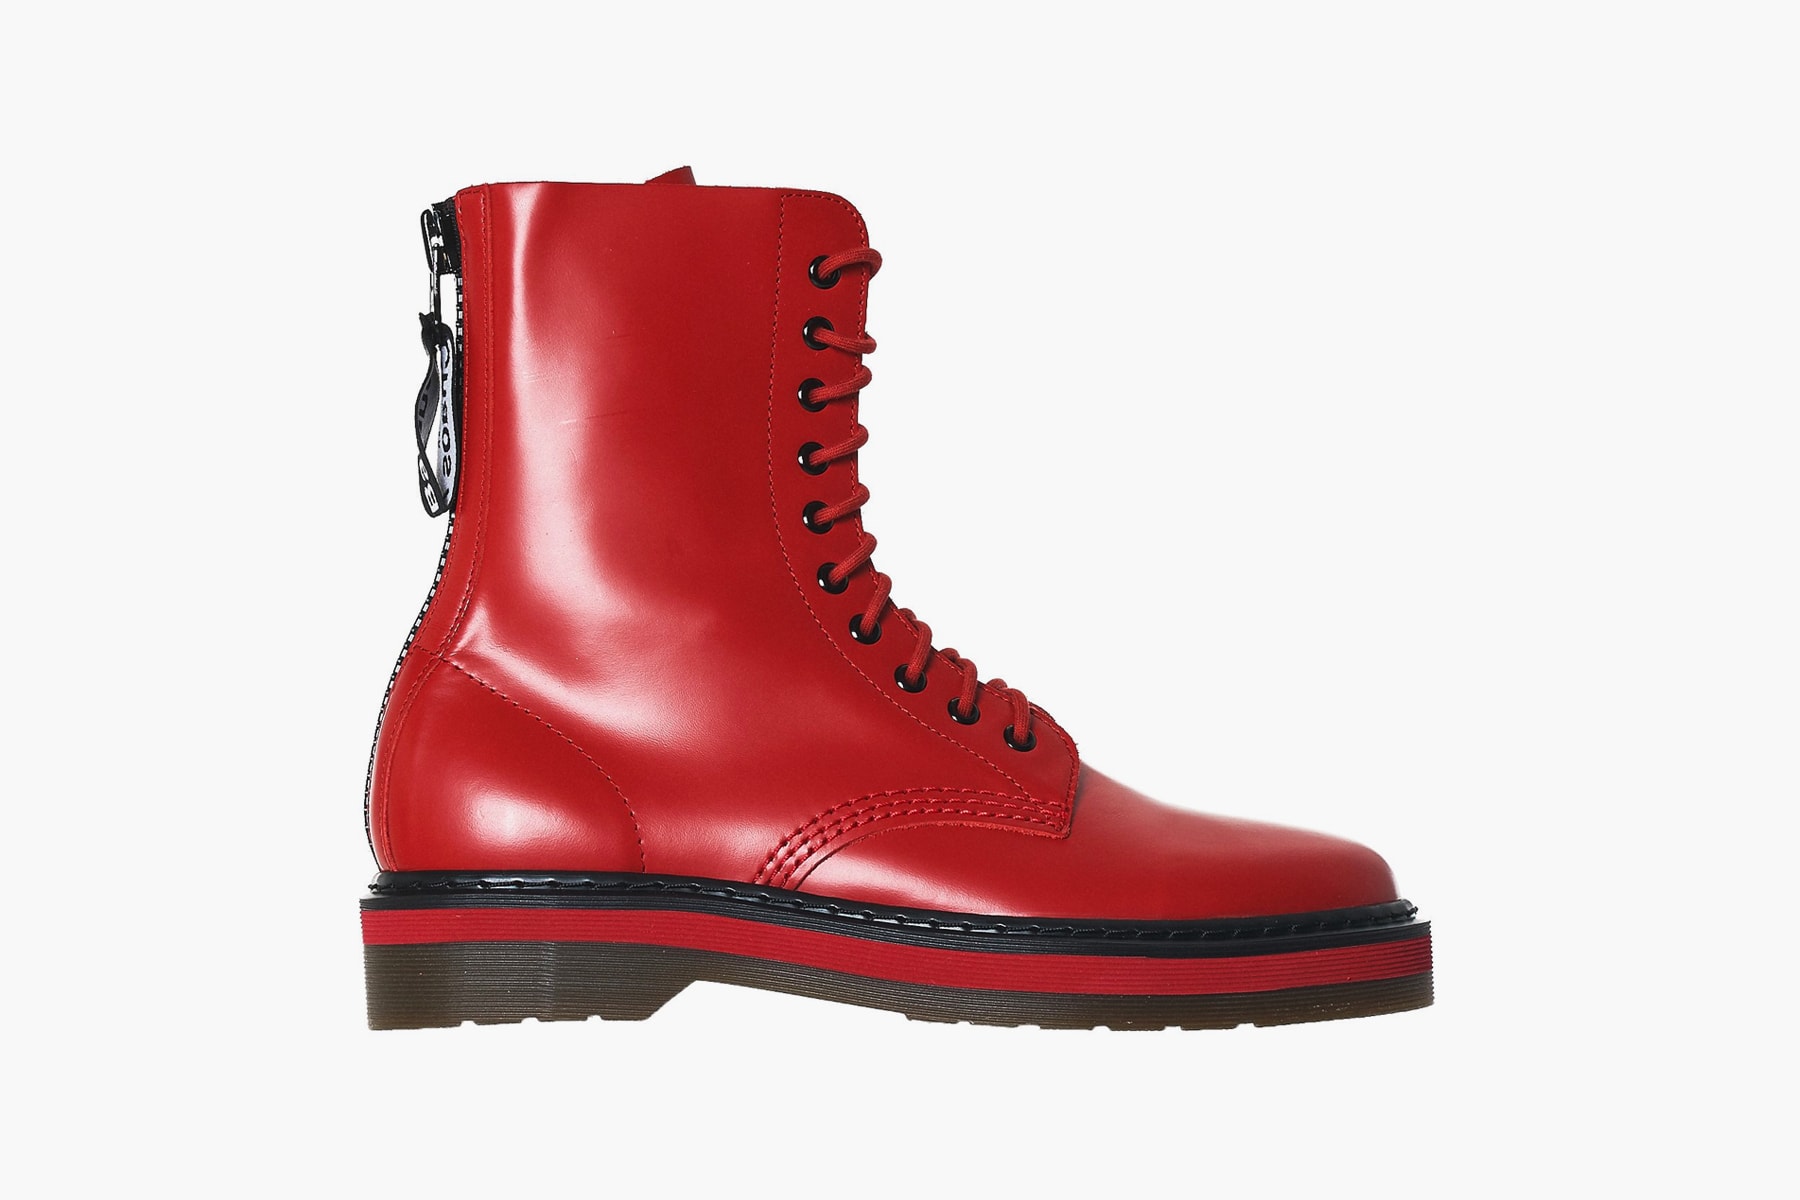 UNDERCOVER Spiritual Noise Combat Boots release info black red spring summer 2018